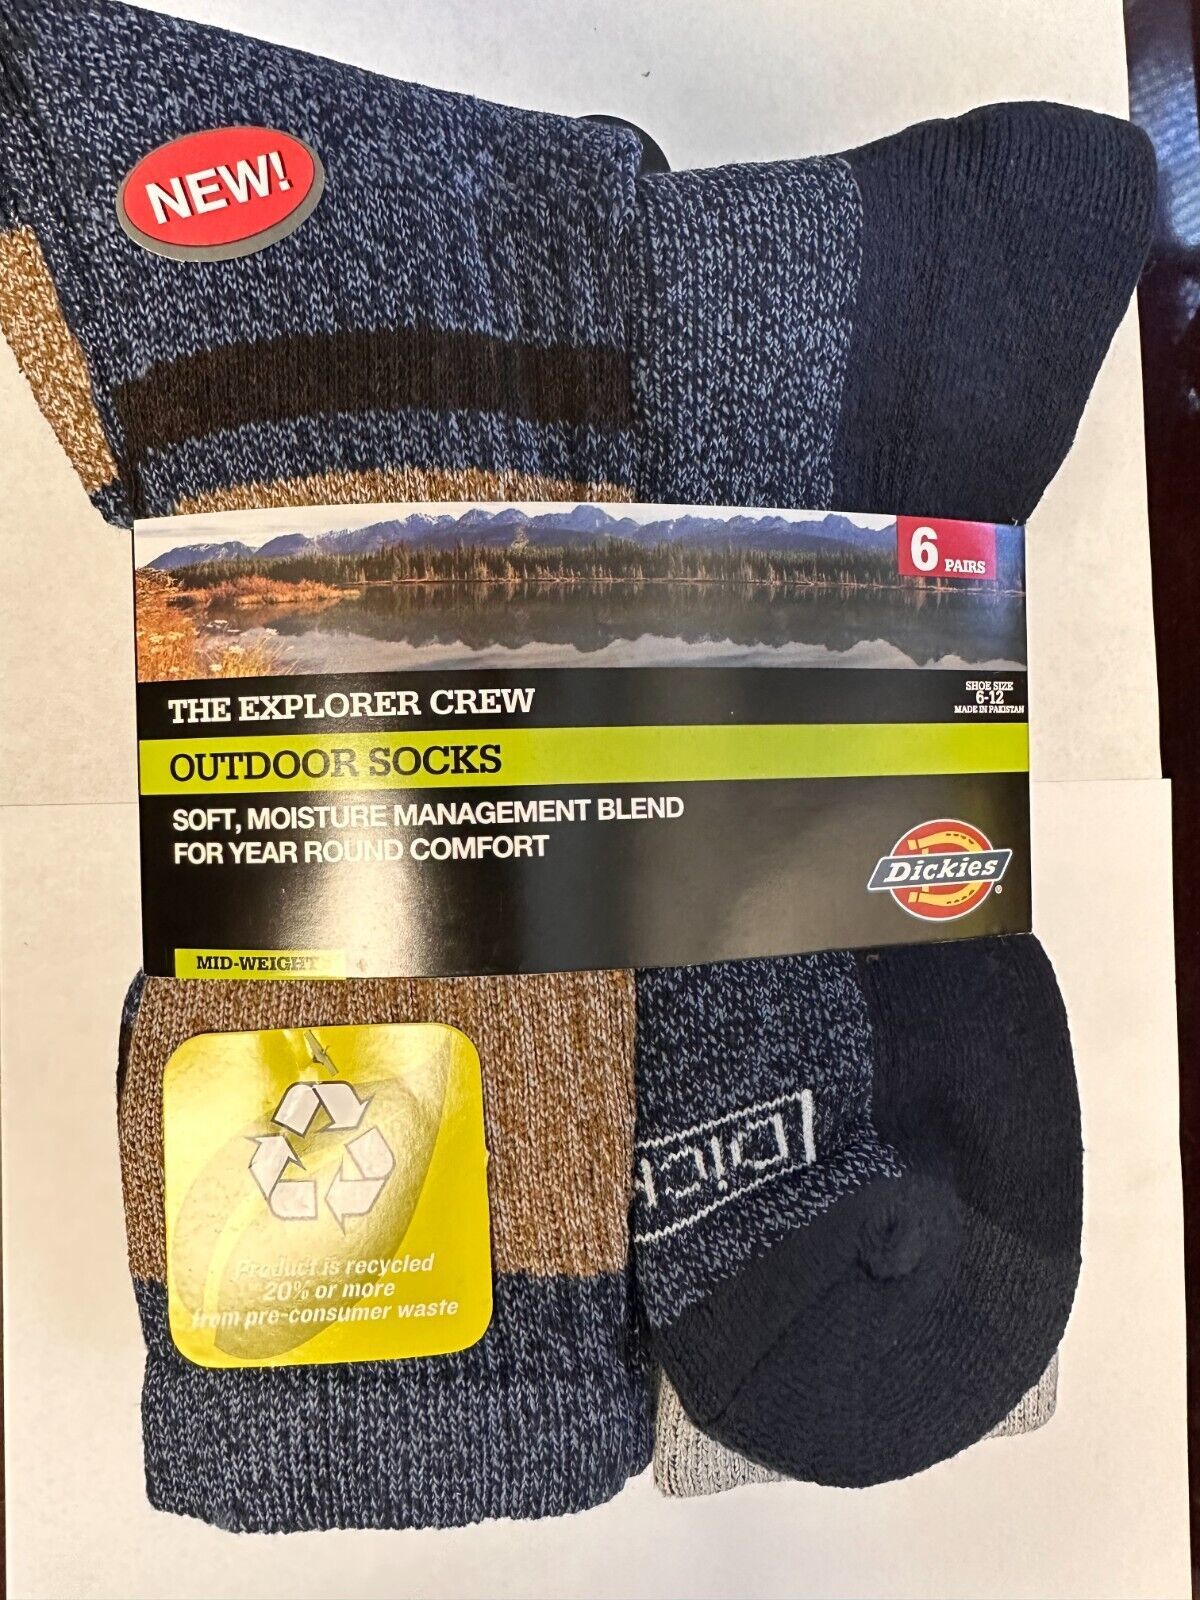 Primary image for DICKIES THE EXPLORER CREW MENS OUTDOOR SOCKS 6-12 6 PAIRS NEW 611018-409